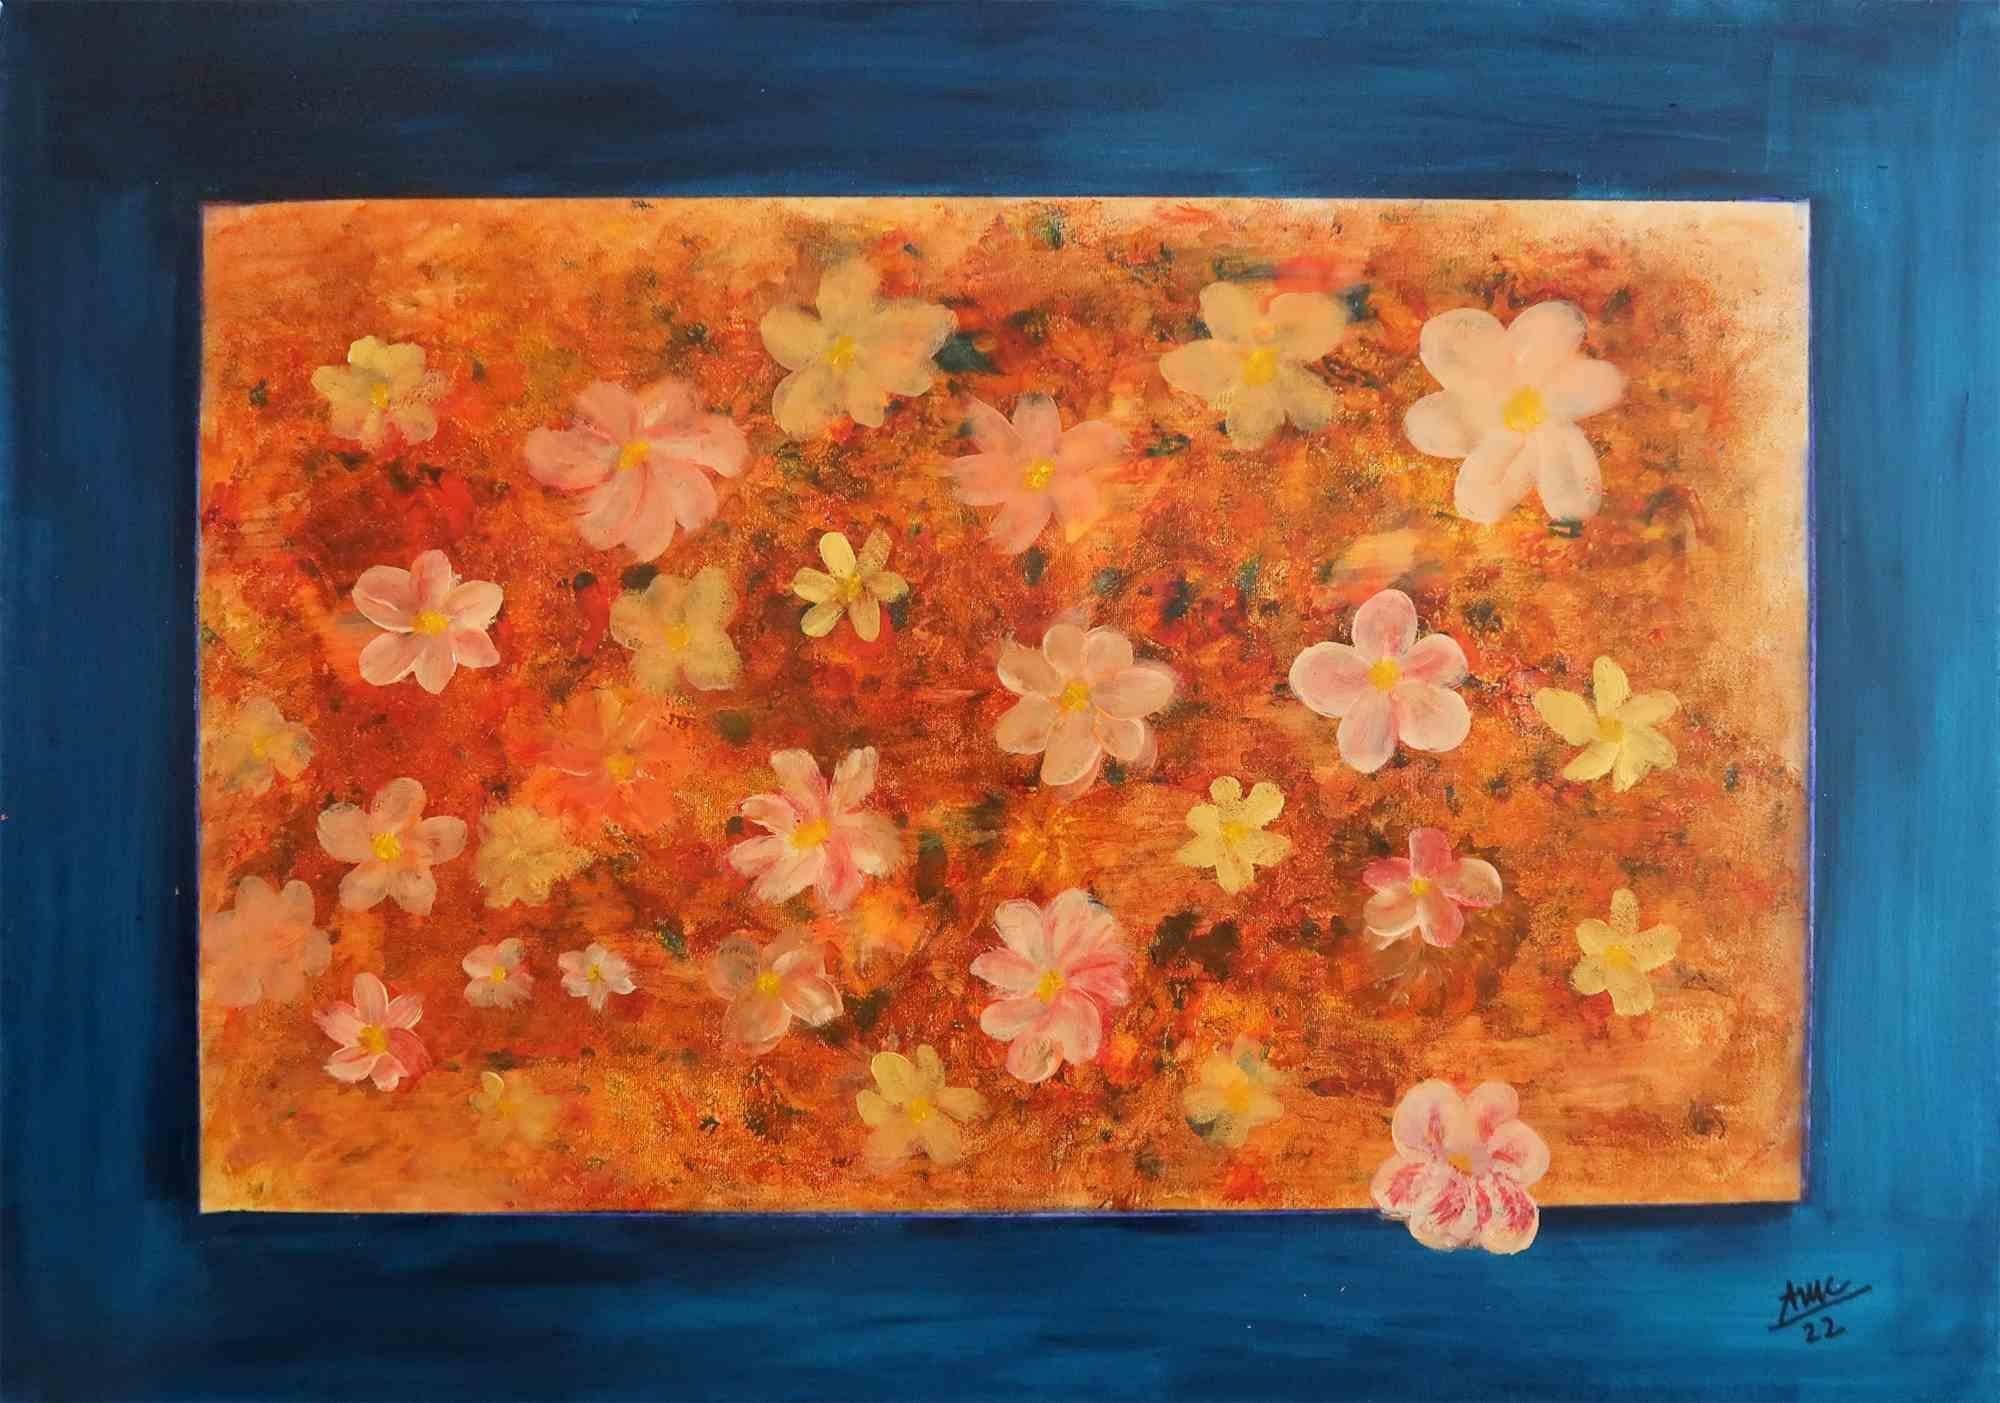 The Soul of Flowers is a lovely artwork realized by the Italian artist Anna Maria Caboni.

The artist uses bright colors to make delicate pastel flowers emerge from the abstract background. The aloof atmosphere and the scattered flowers on the